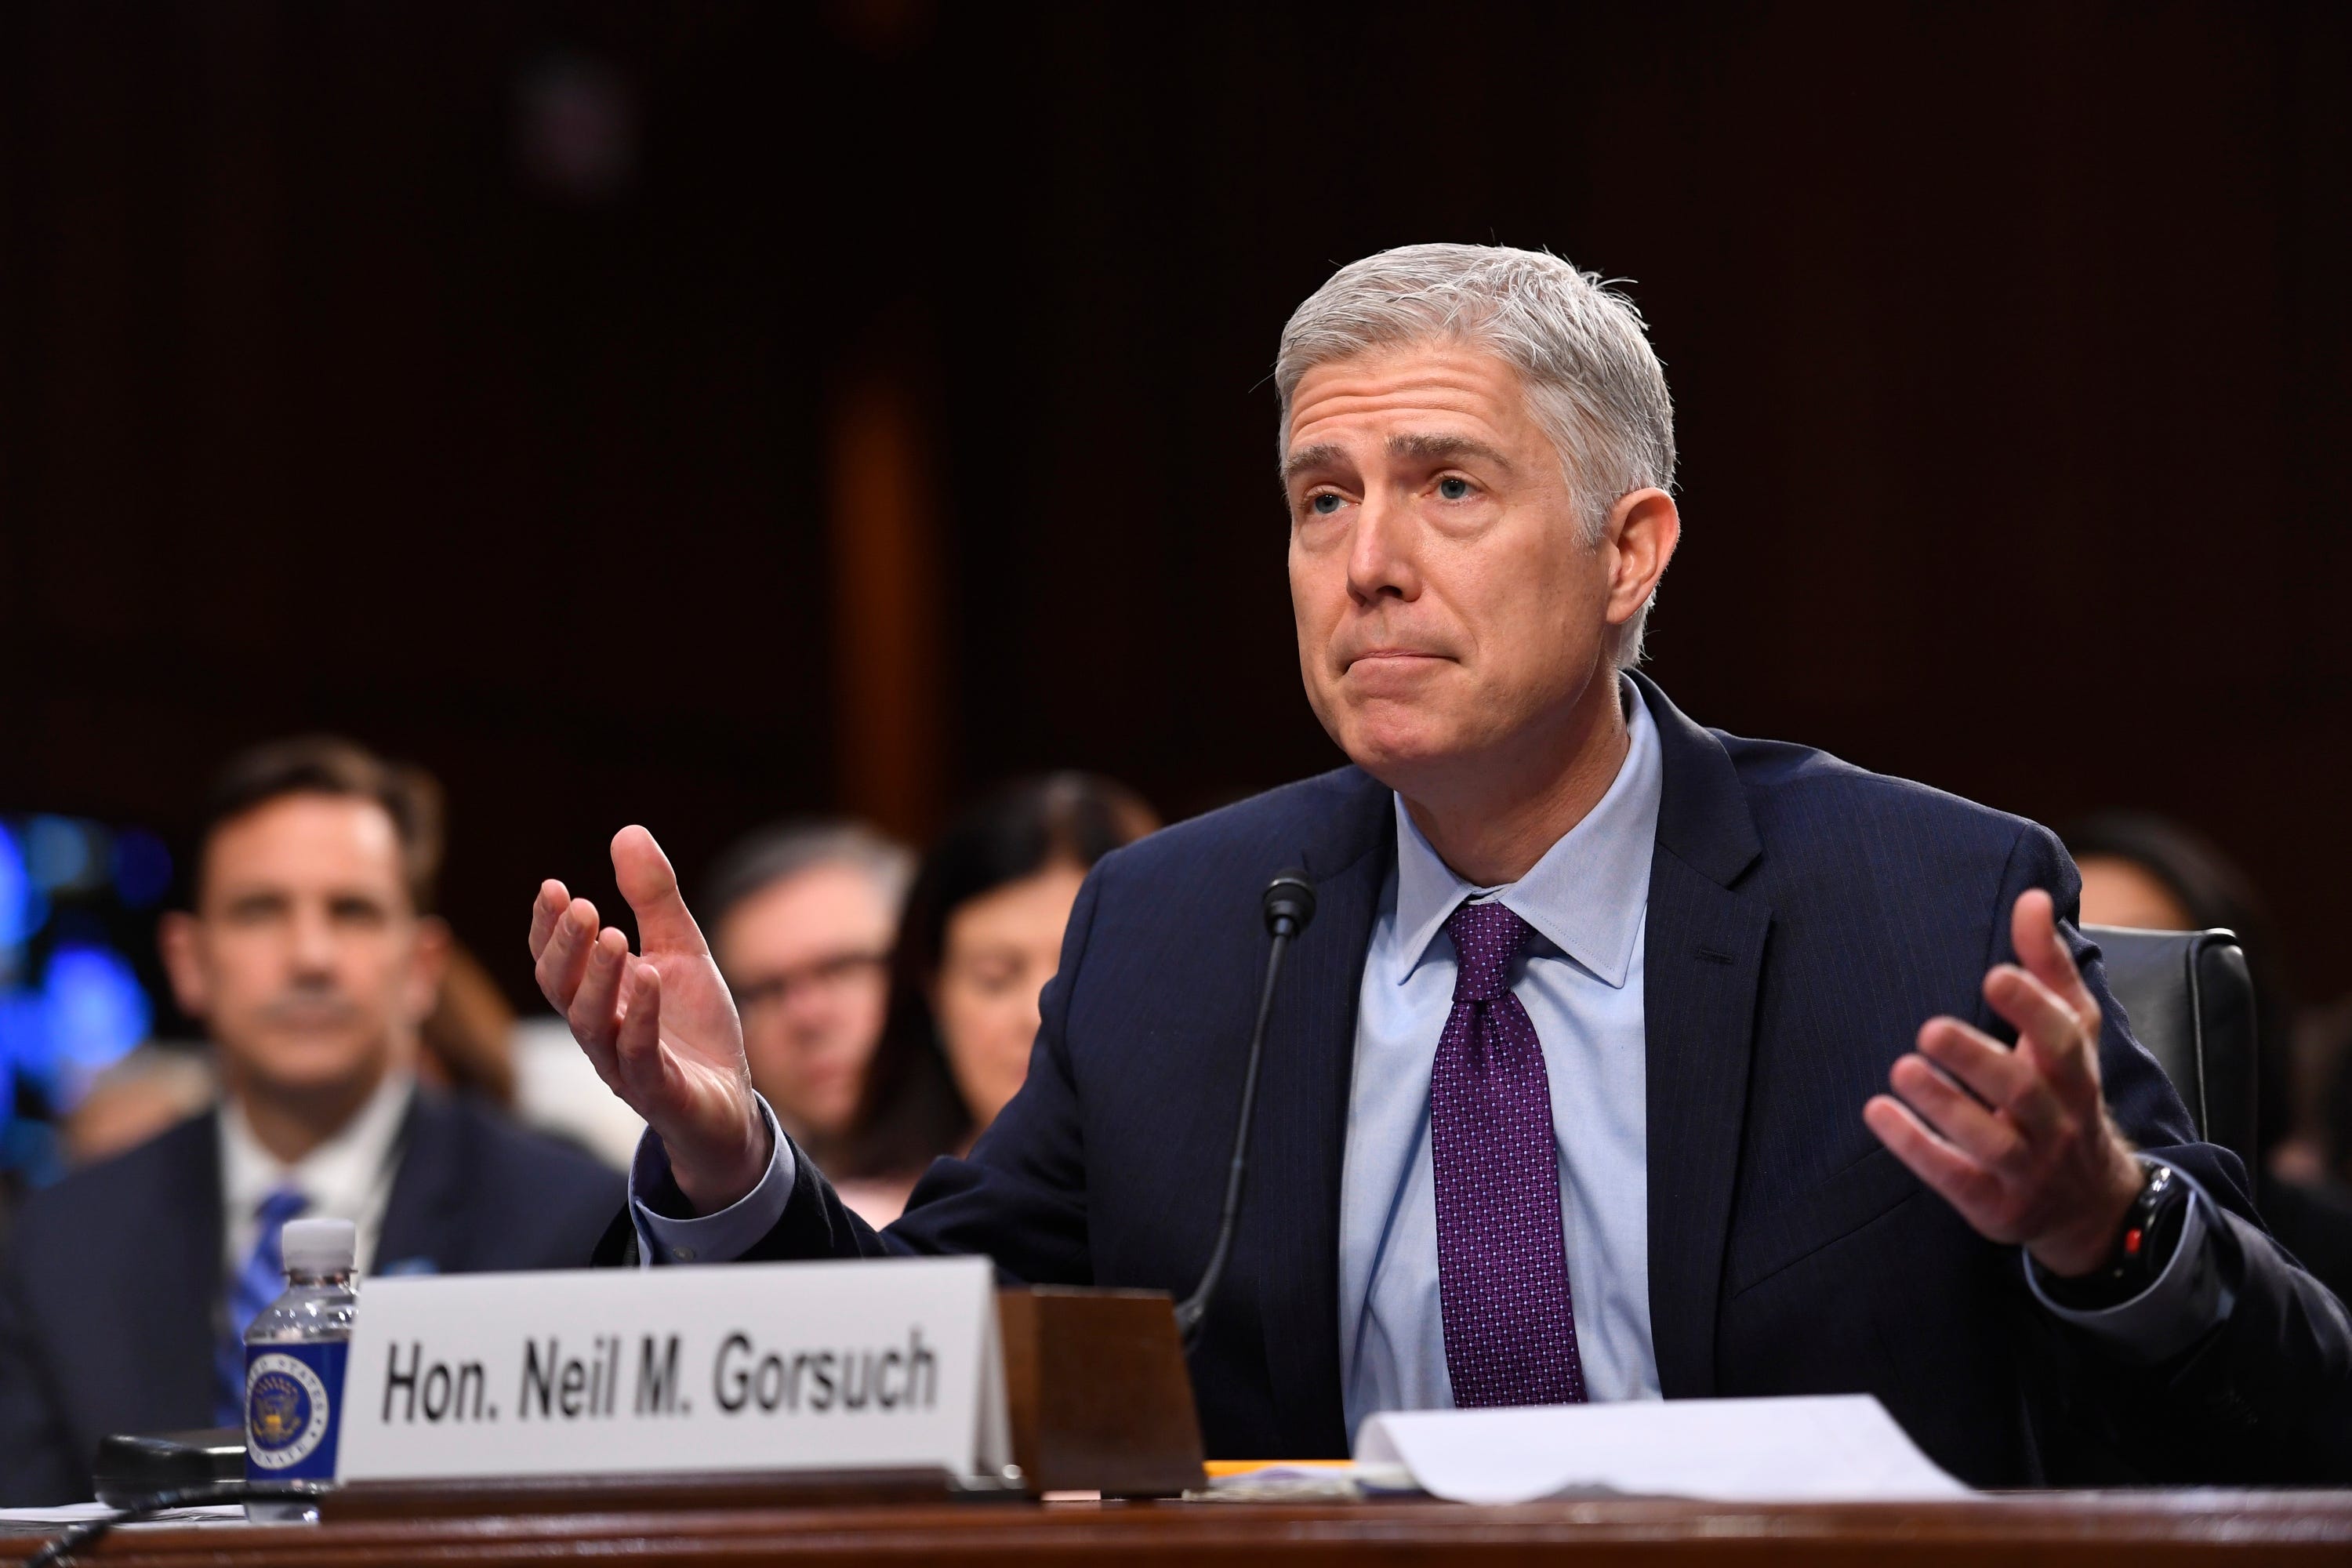 Supreme Court nominee Neil Gorsuch evades tough questions at confirmation hearing